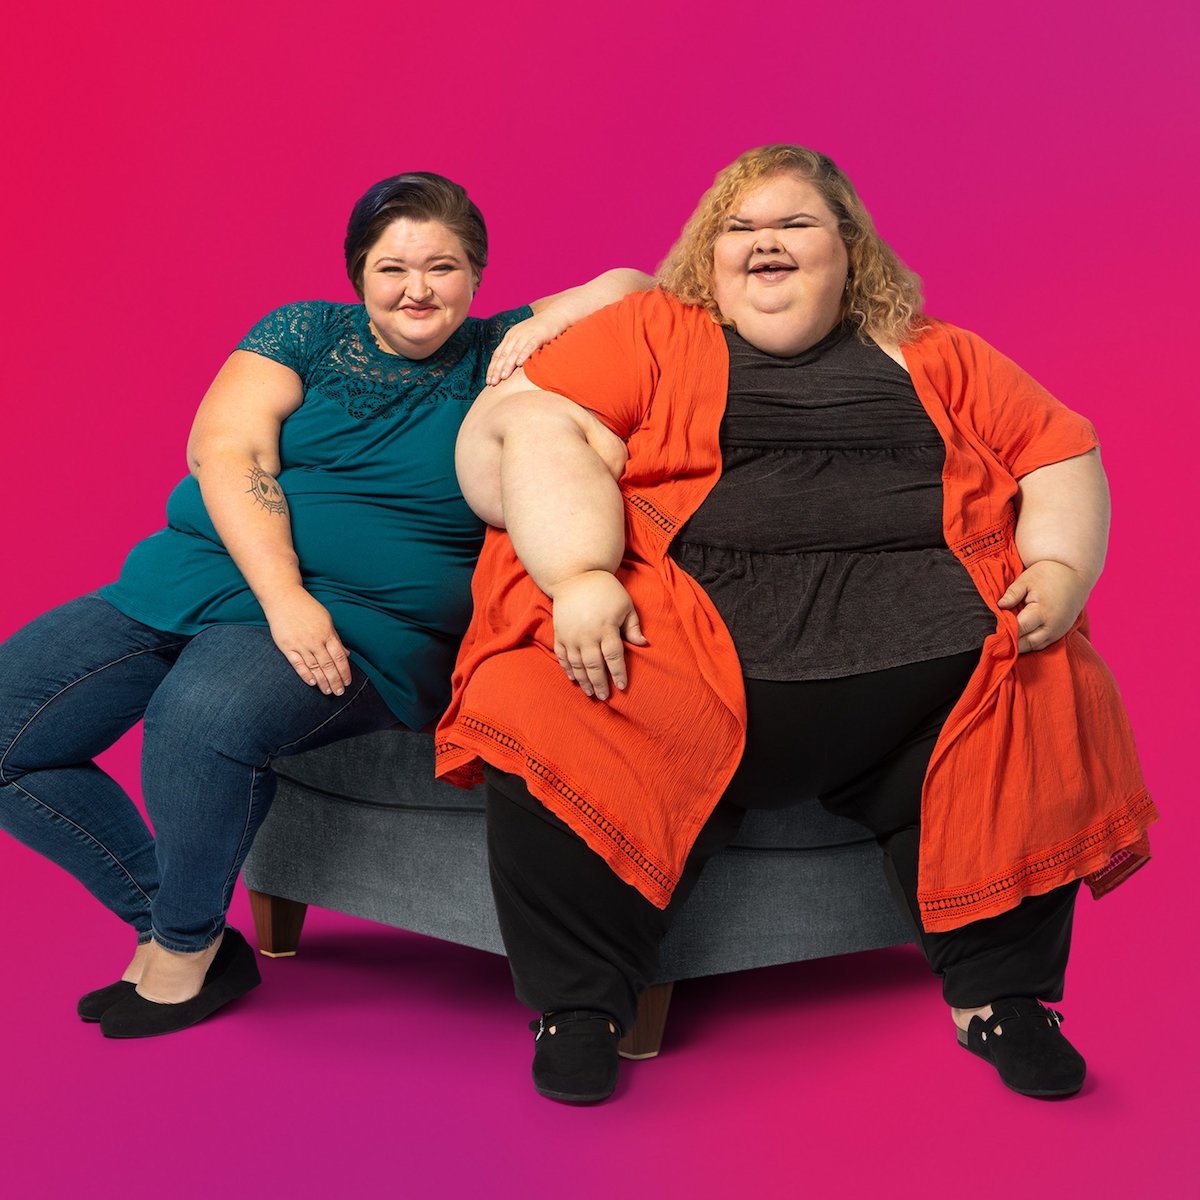 Amy Slaton, who mentioned 'Murder in the Heartland,' and Tammy Slaton, the stars of '1000-Lb. Sisters'